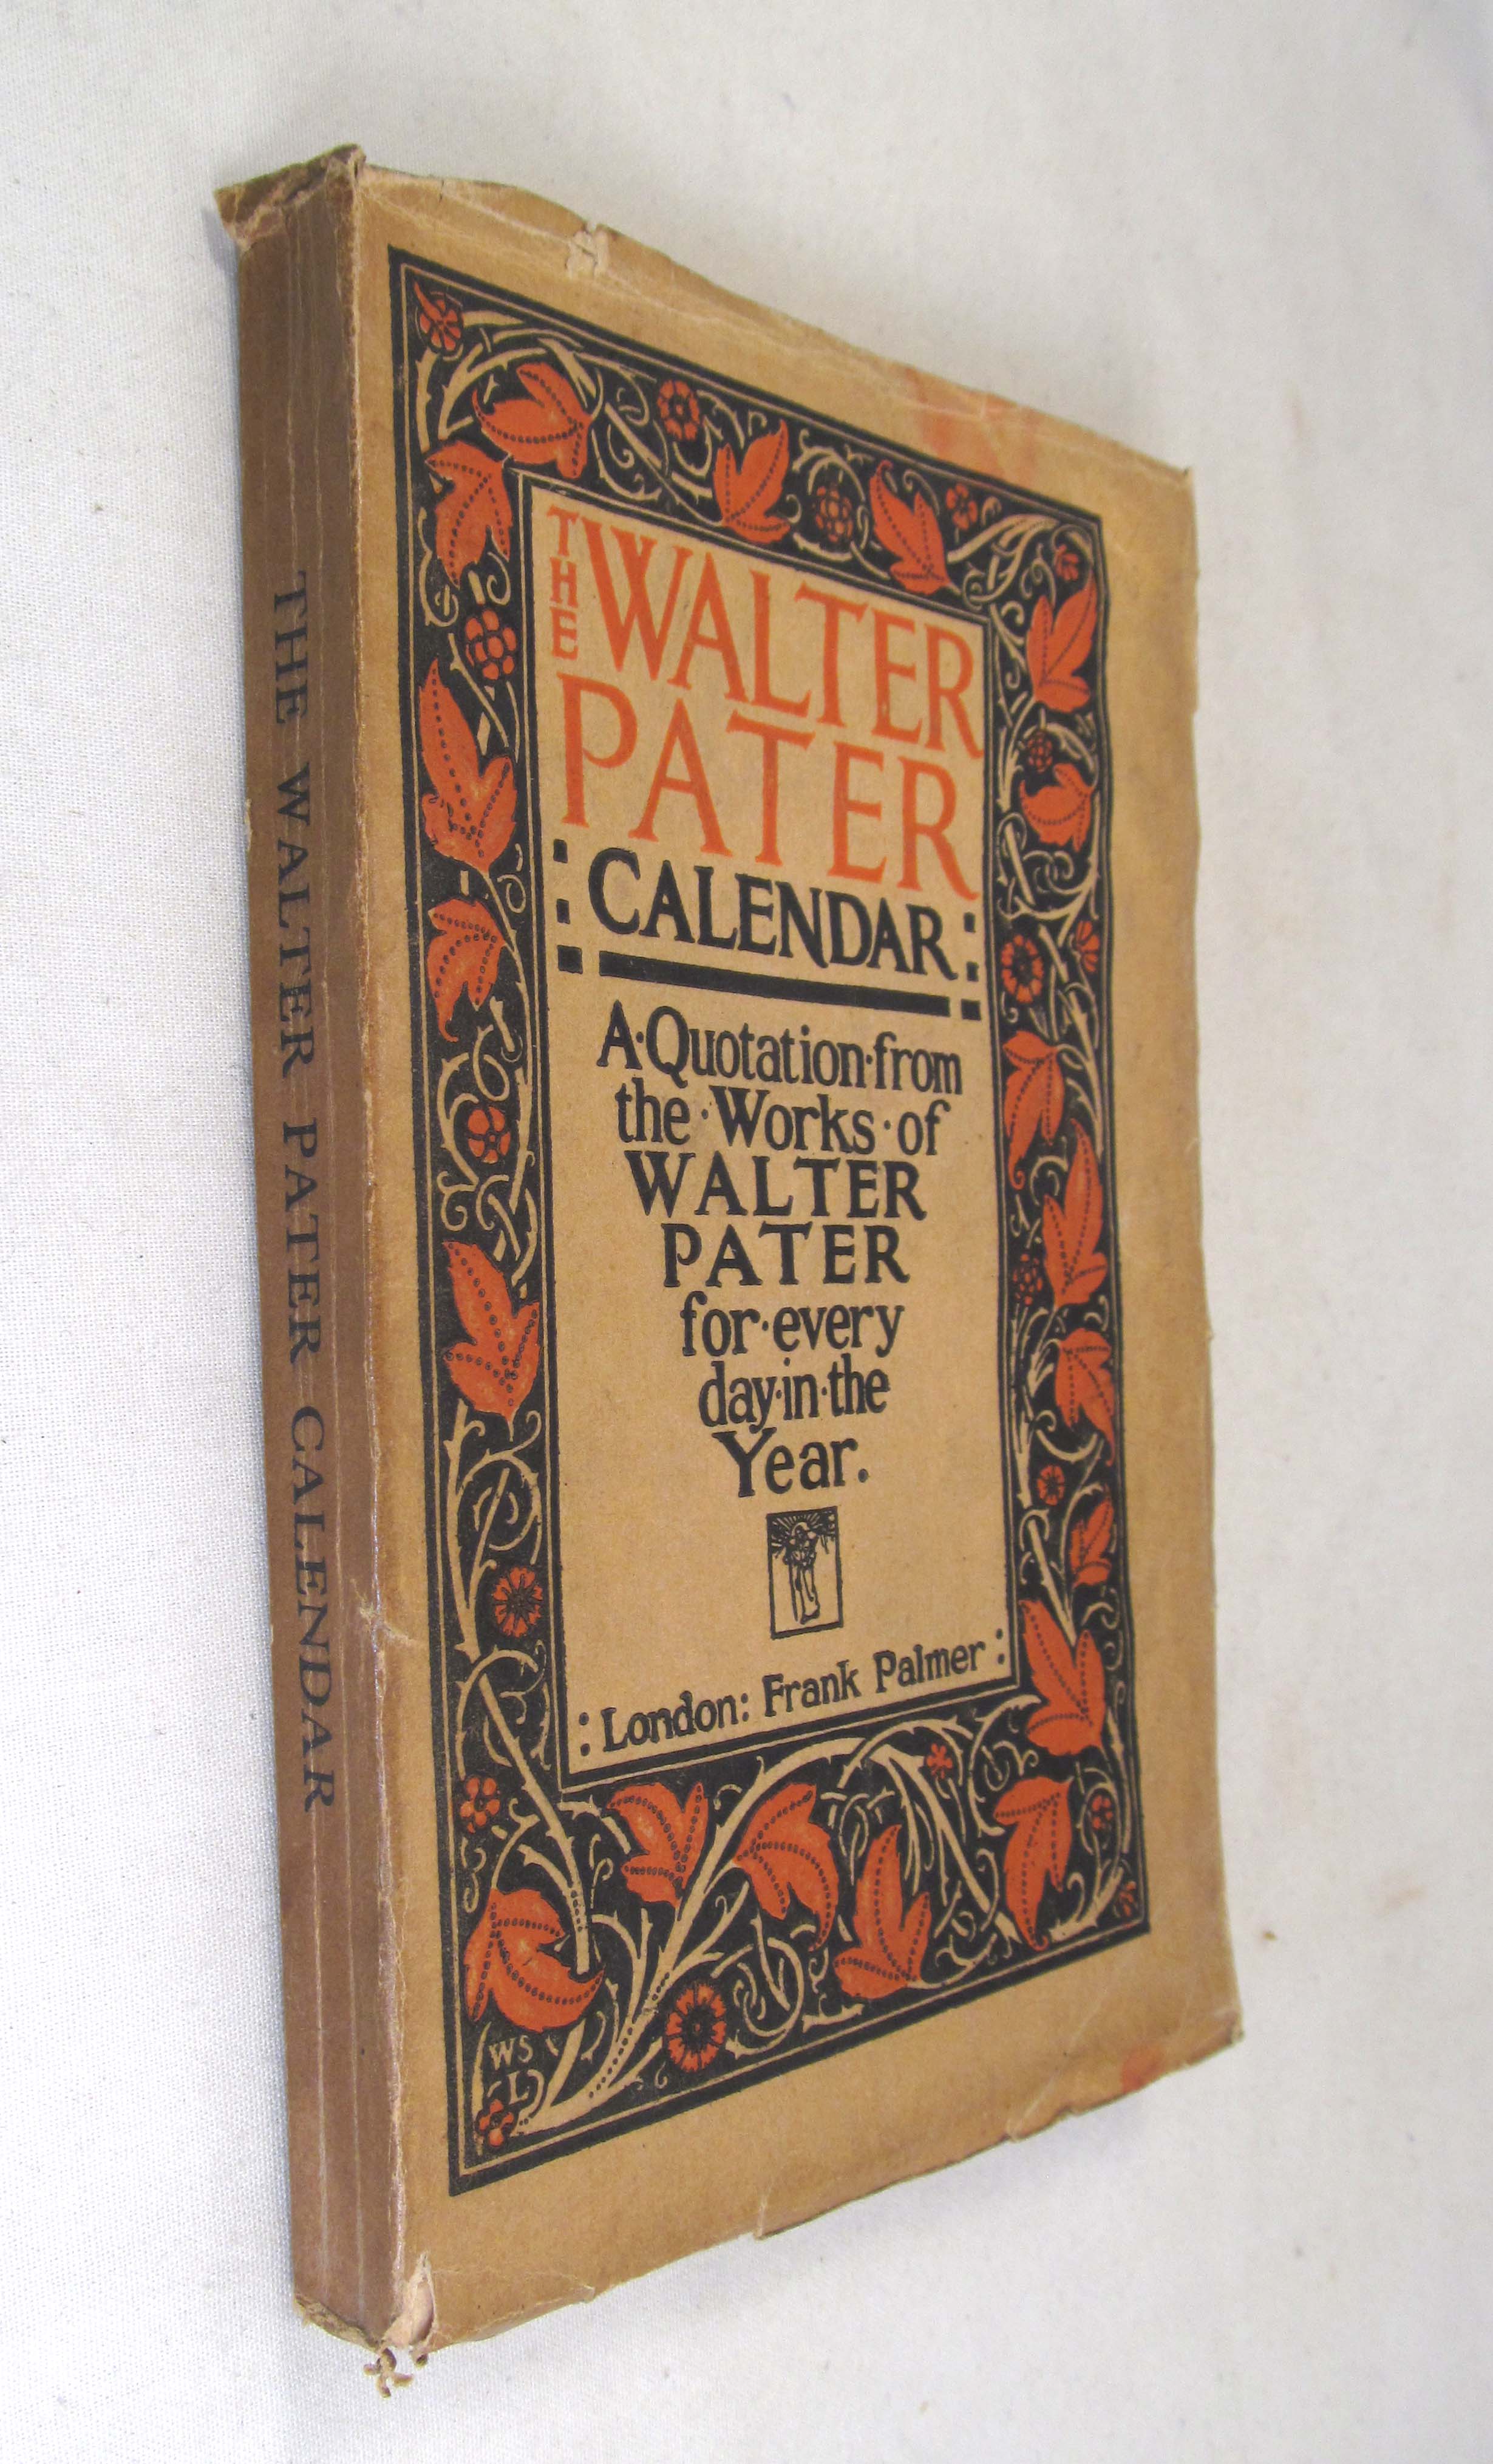 Walter Pater Calendar A Quotation From Walter Horatio Pater For Every